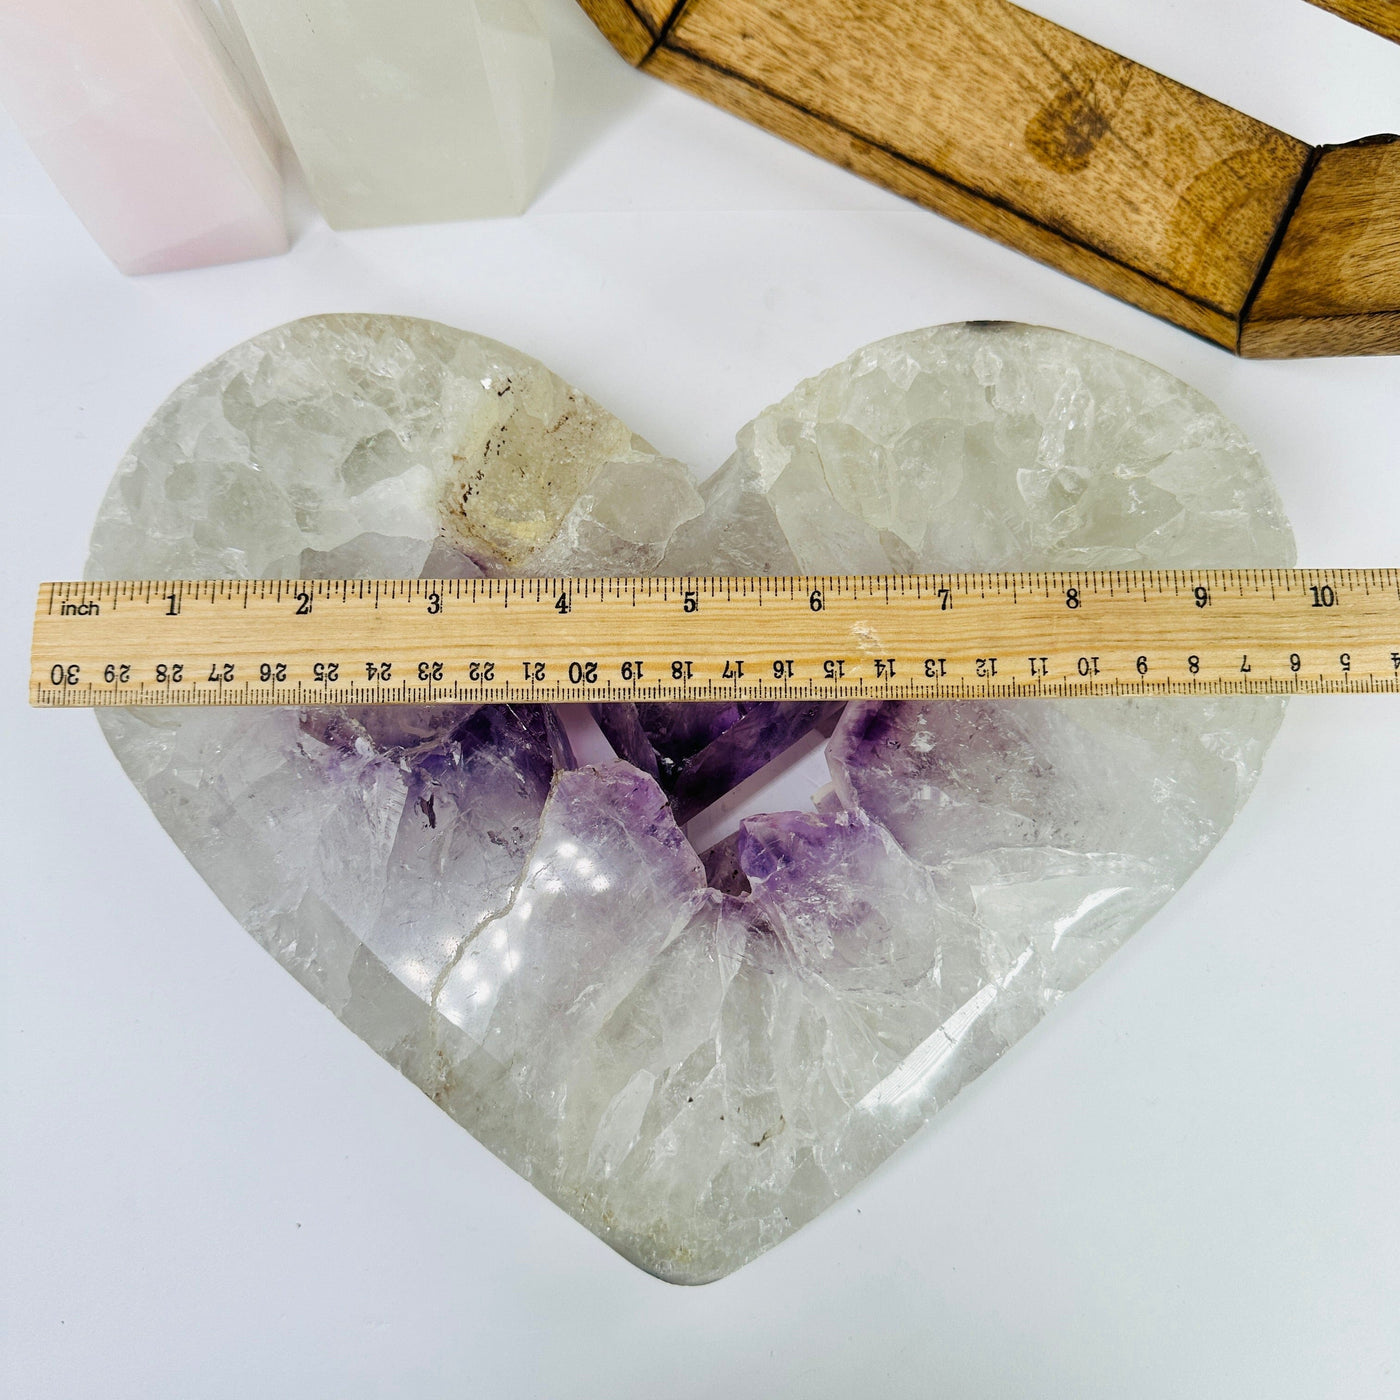 amethyst heart next to a ruler for size reference